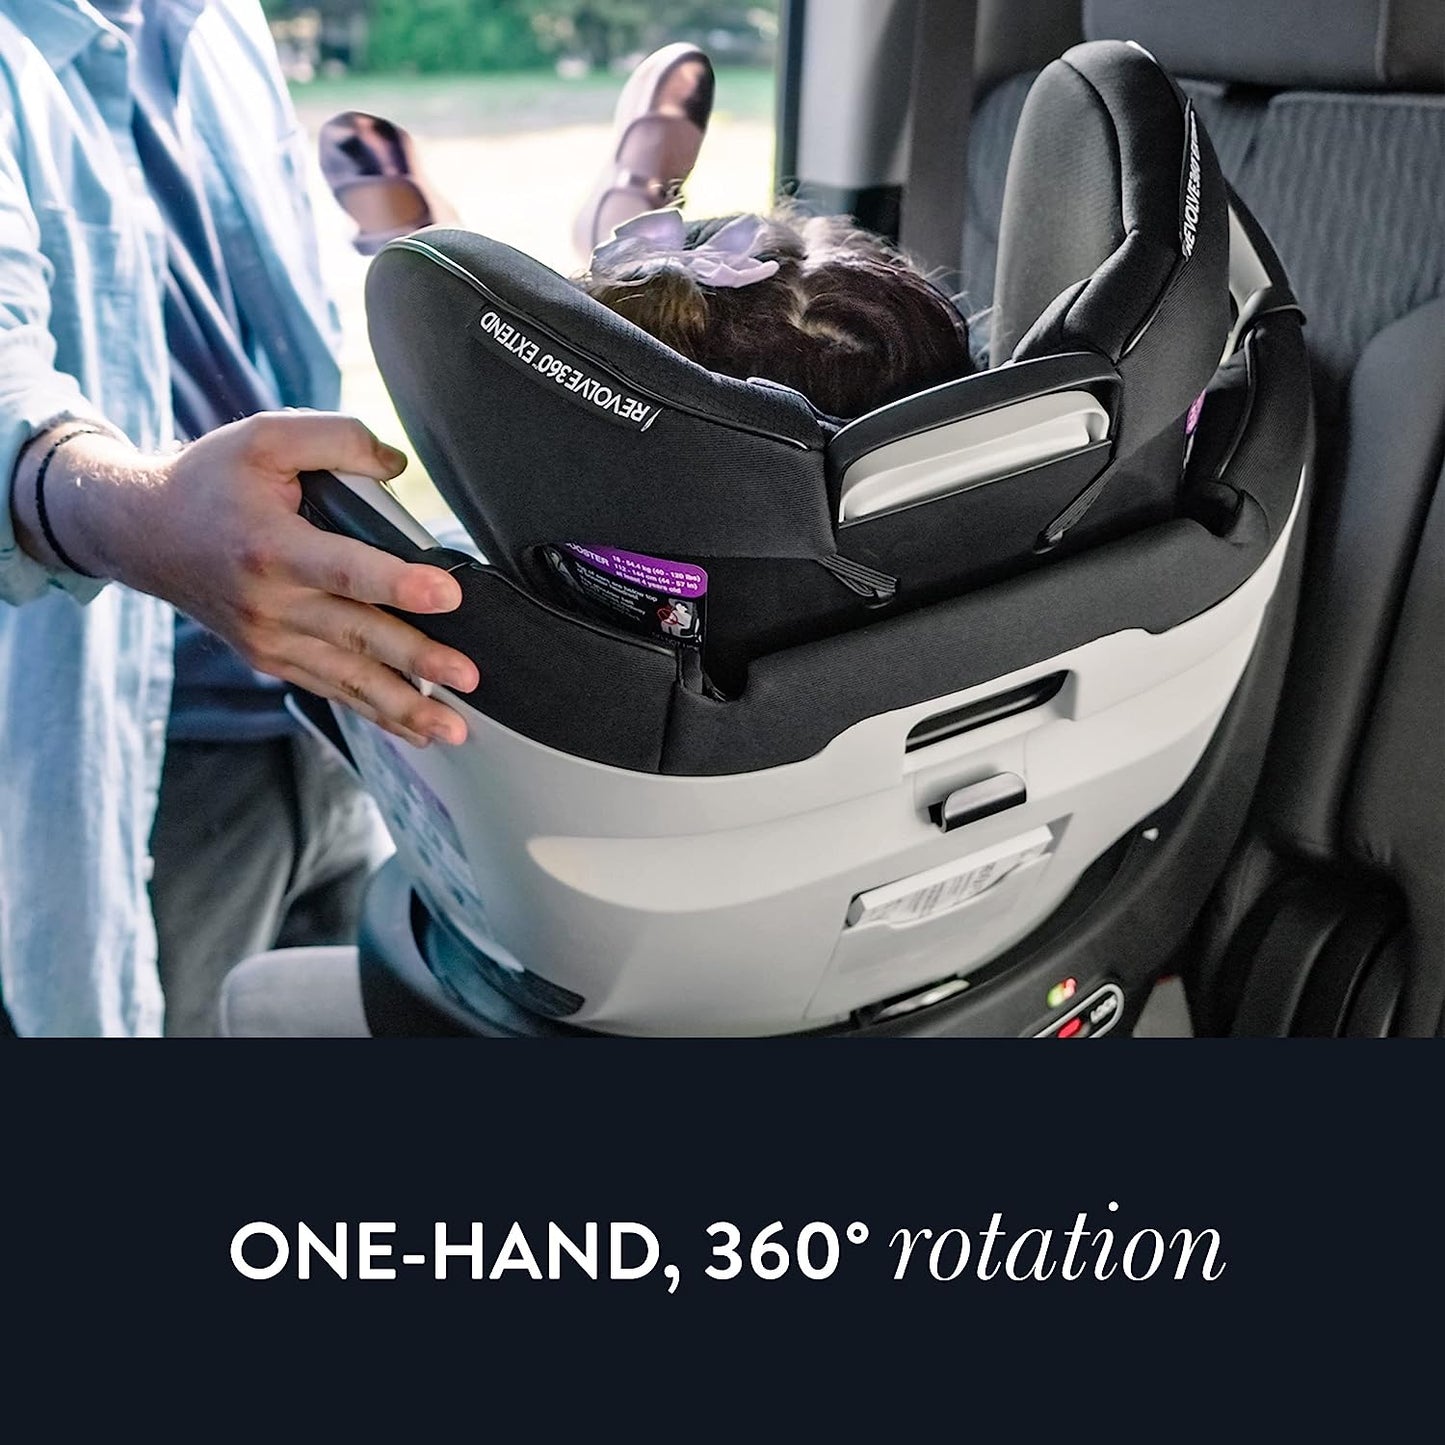 Evenflo Gold Revolve360 Extend All-in-One Rotational Car Seat (Opal Pink)